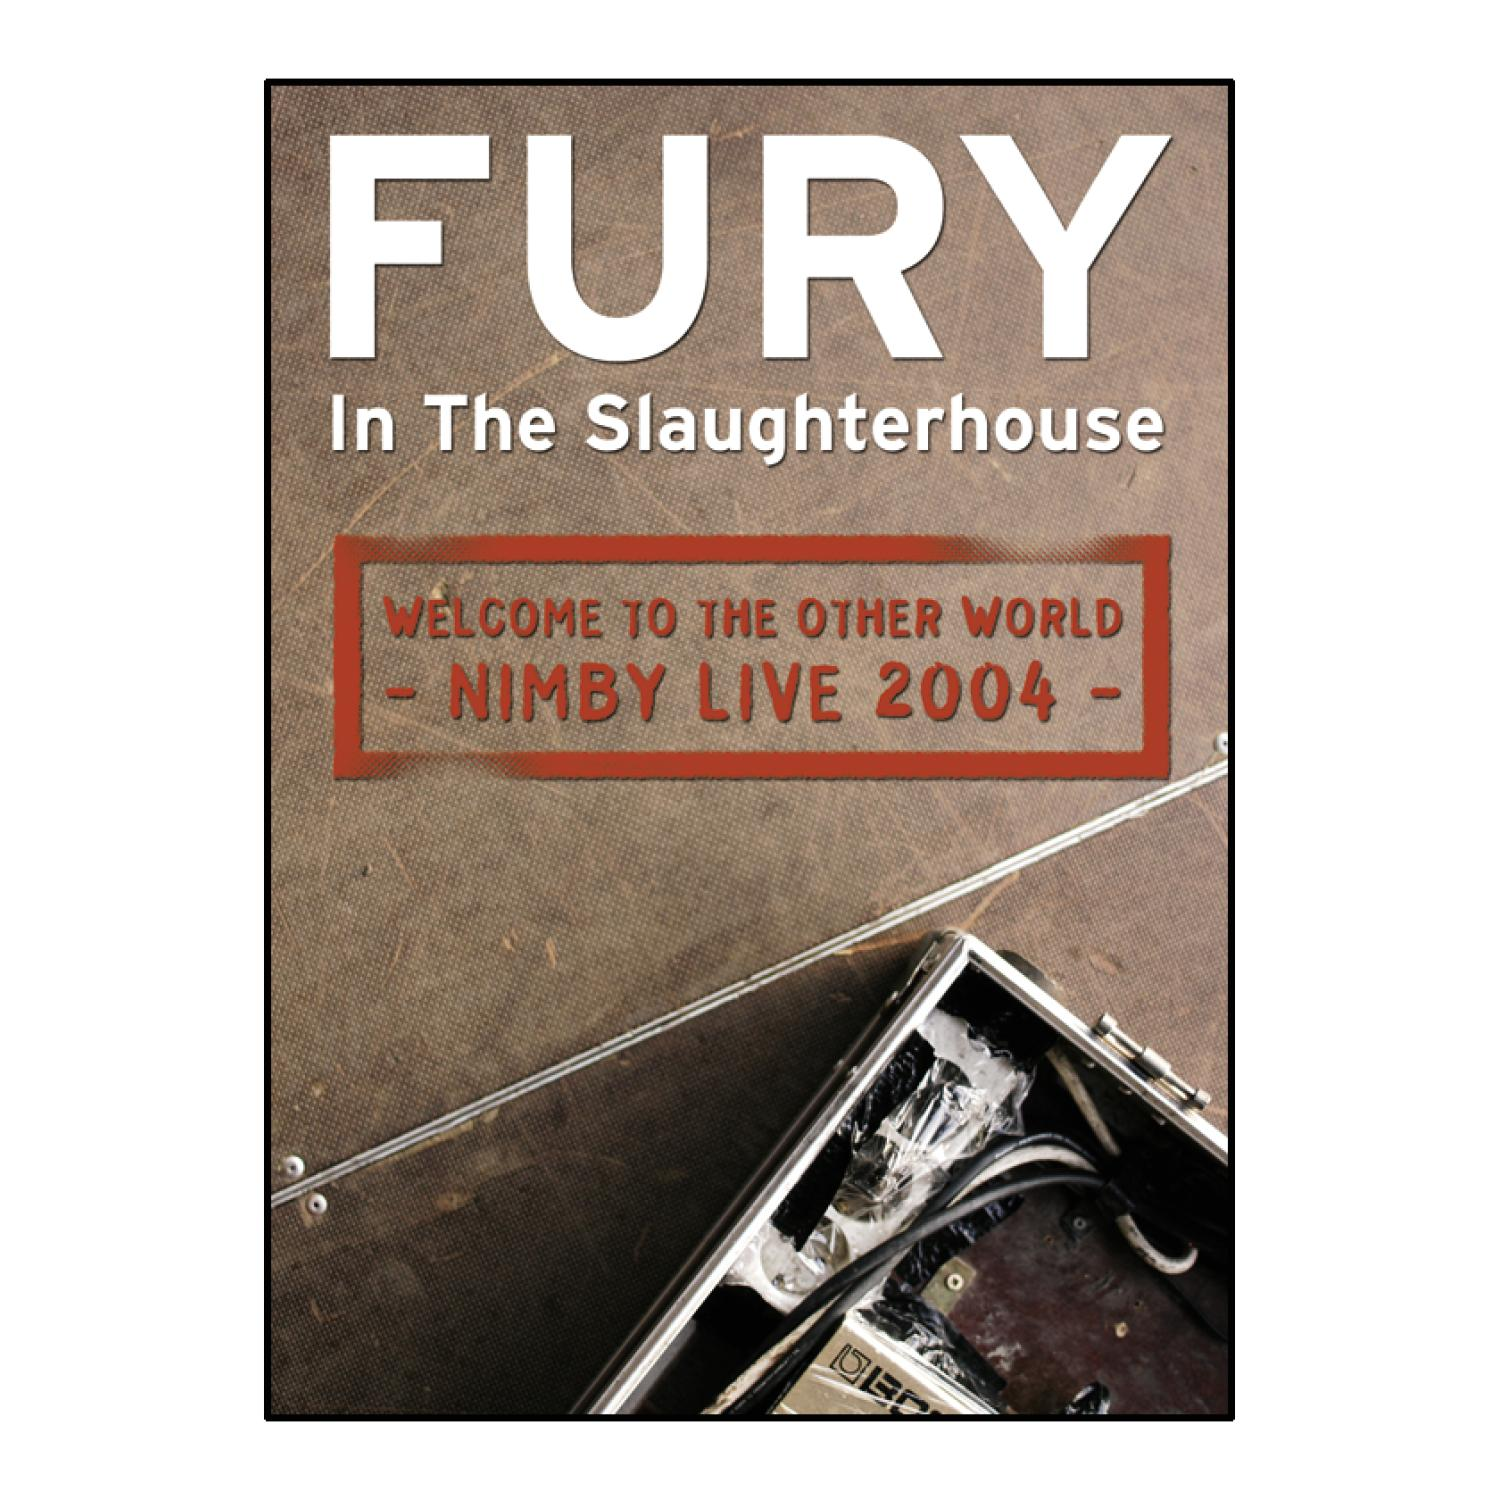 The NIMBY World in - - Fury - Other Fury in Slaughterhouse Slaughterhouse To live – the Welcome (DVD) the 2004